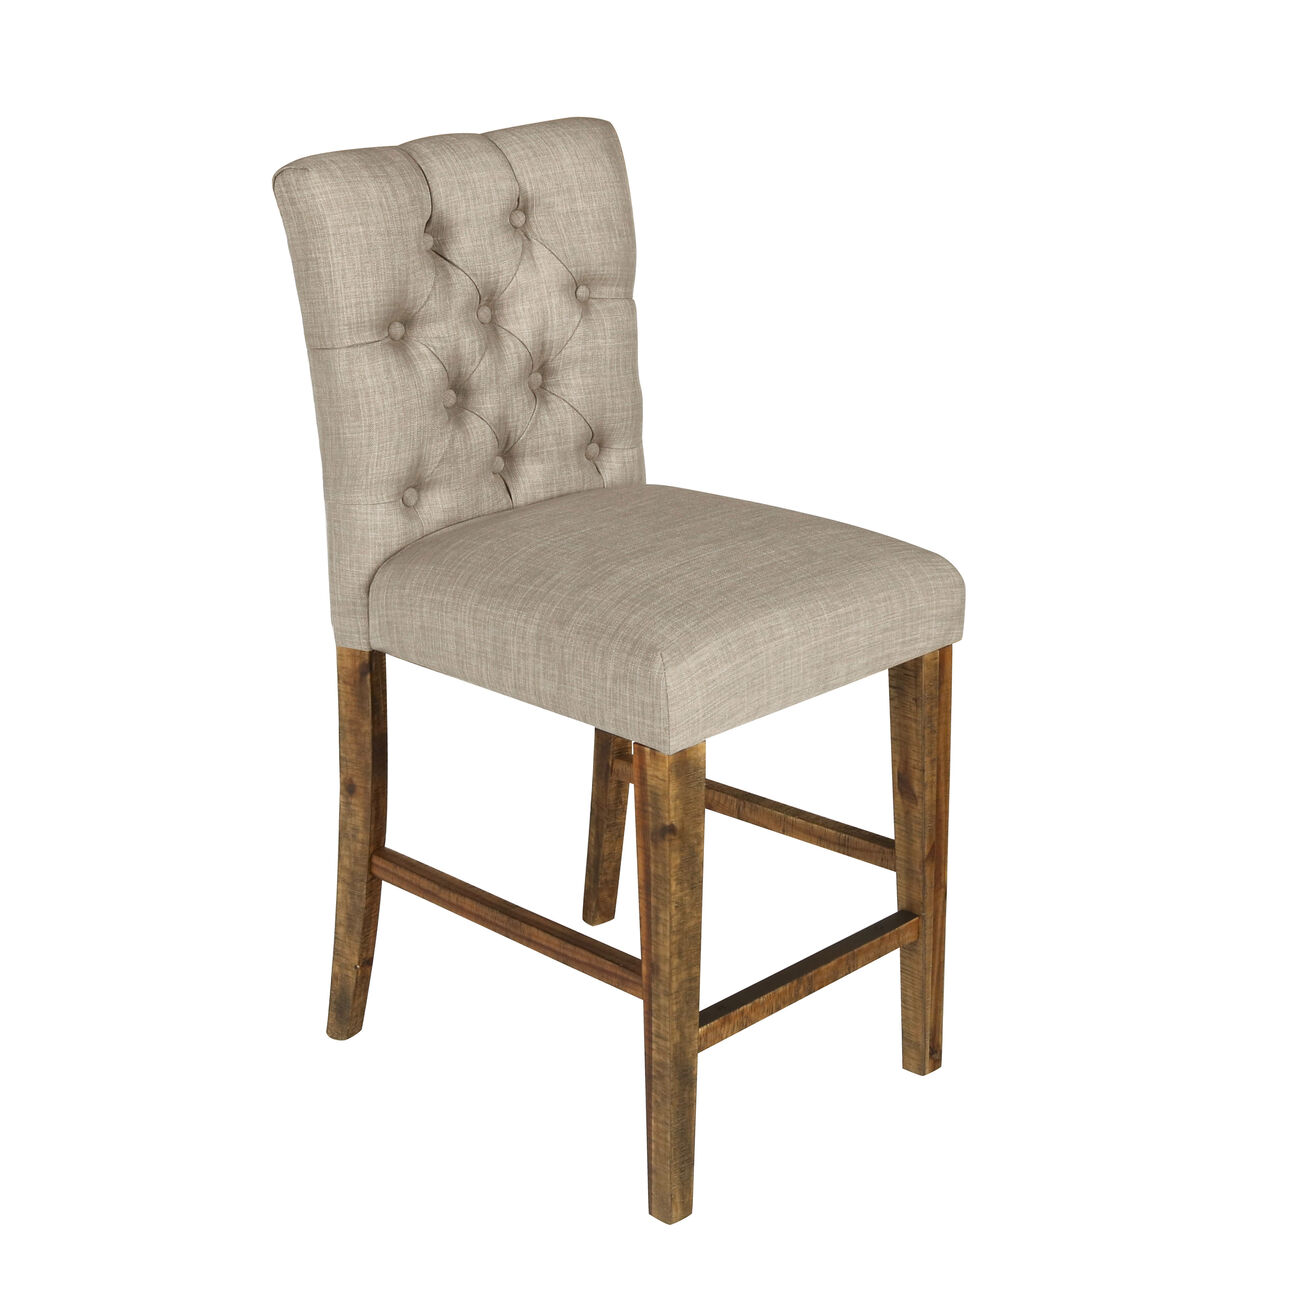 Counter Height Chair with Button Tufted Backrest, Set of 2, Beige and Brown